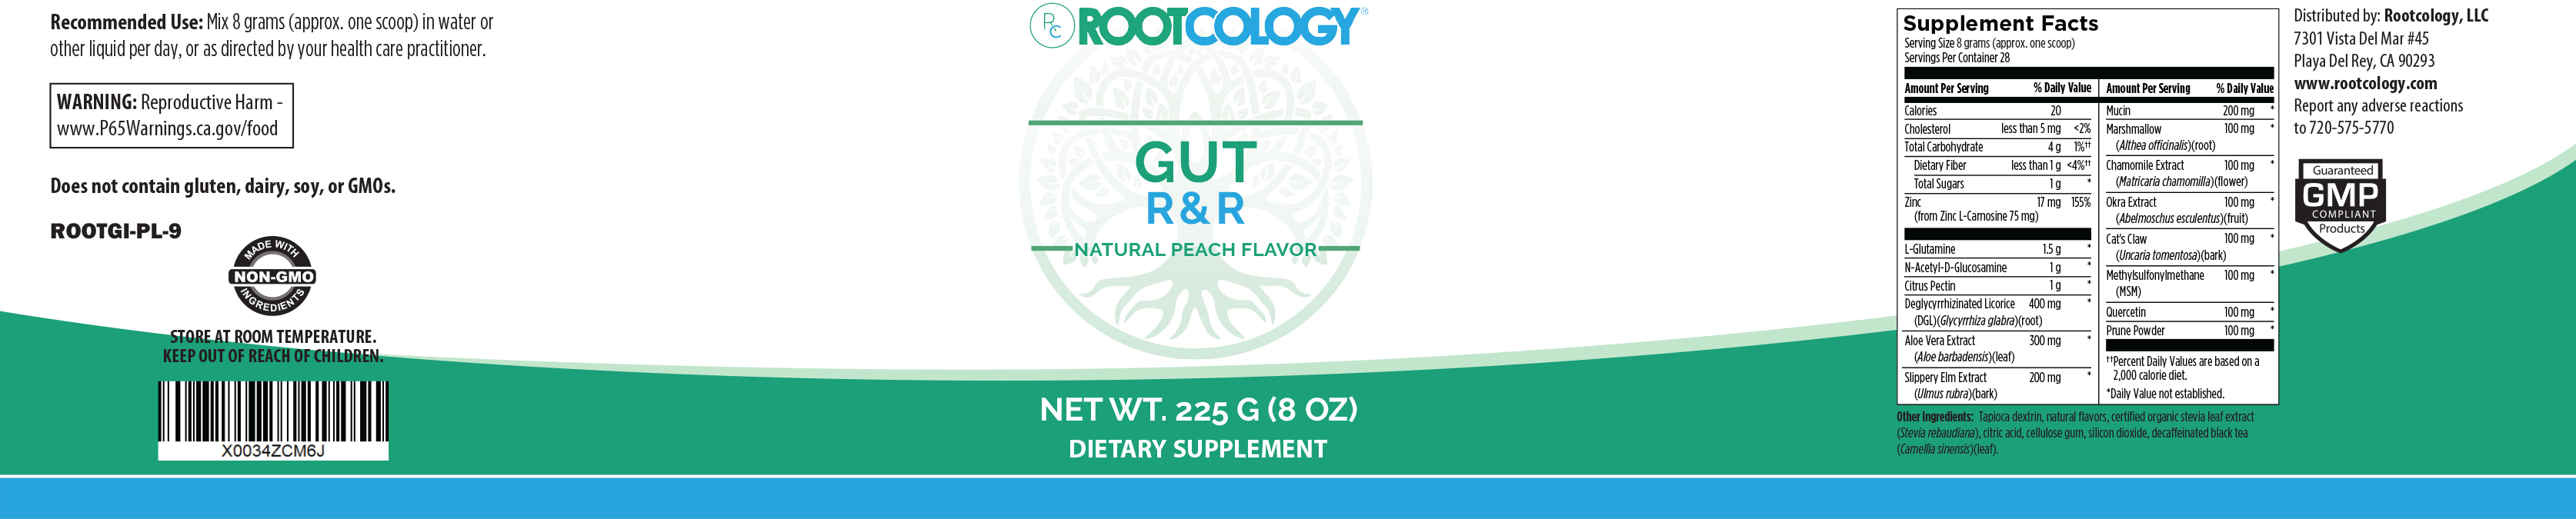 Rootcology Gut R&R Supplement Label